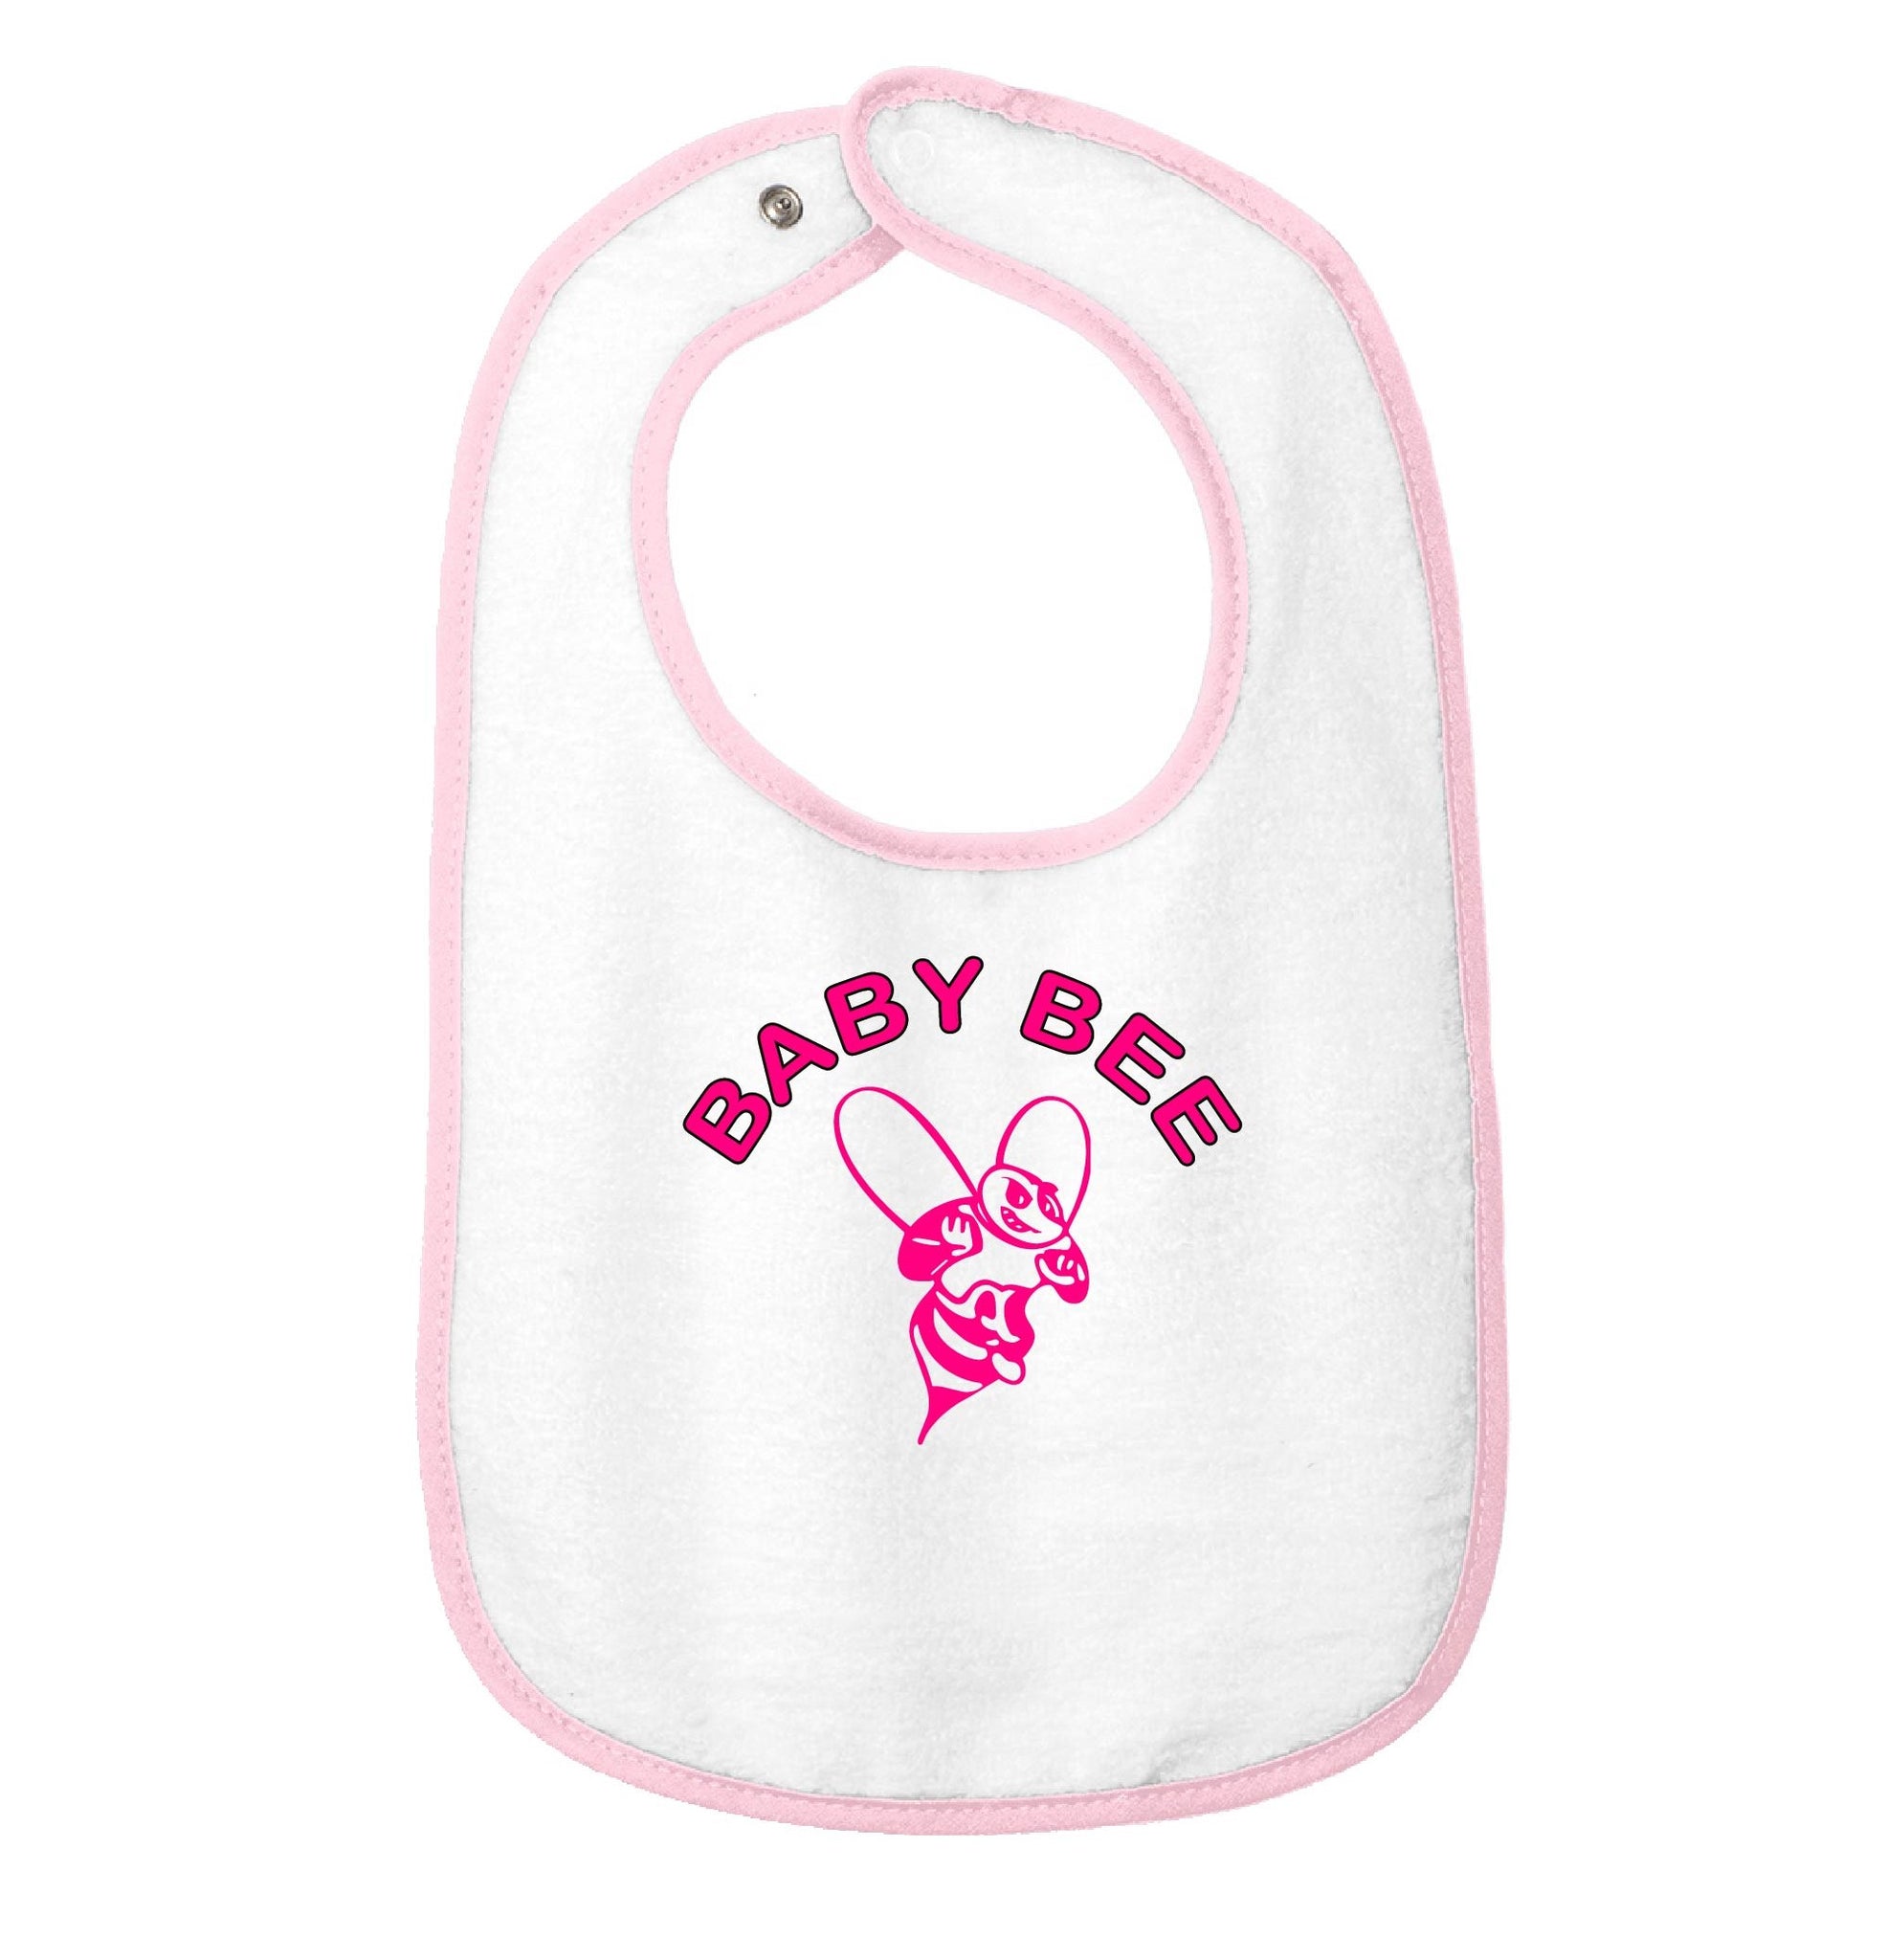 "Baby Bee" Embroidered Bib